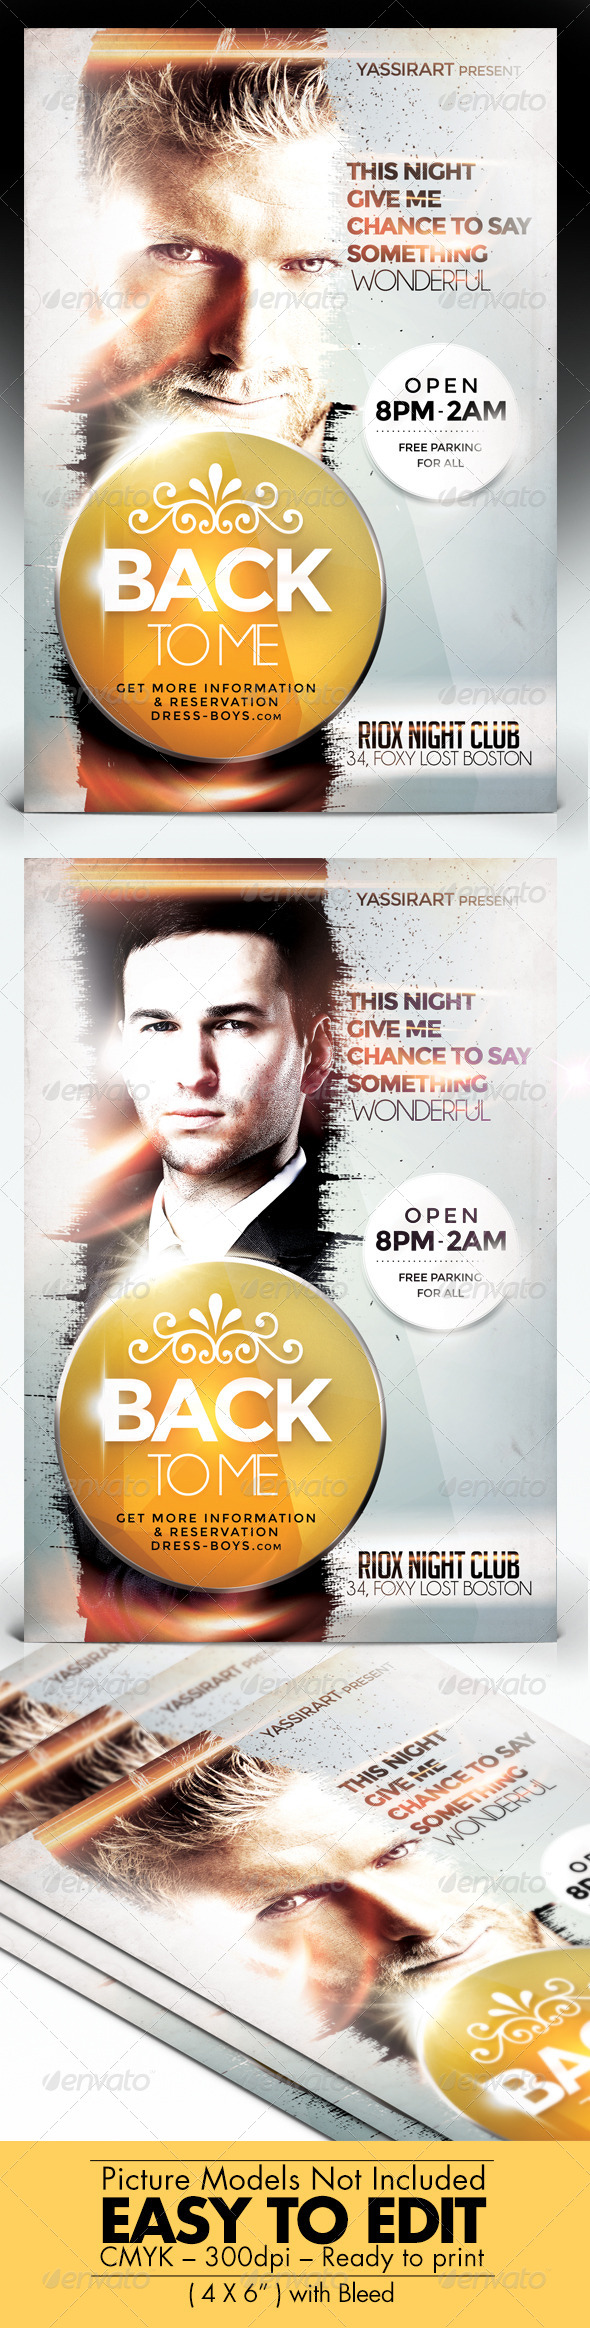 GraphicRiver Back To Me Flyer 7677351